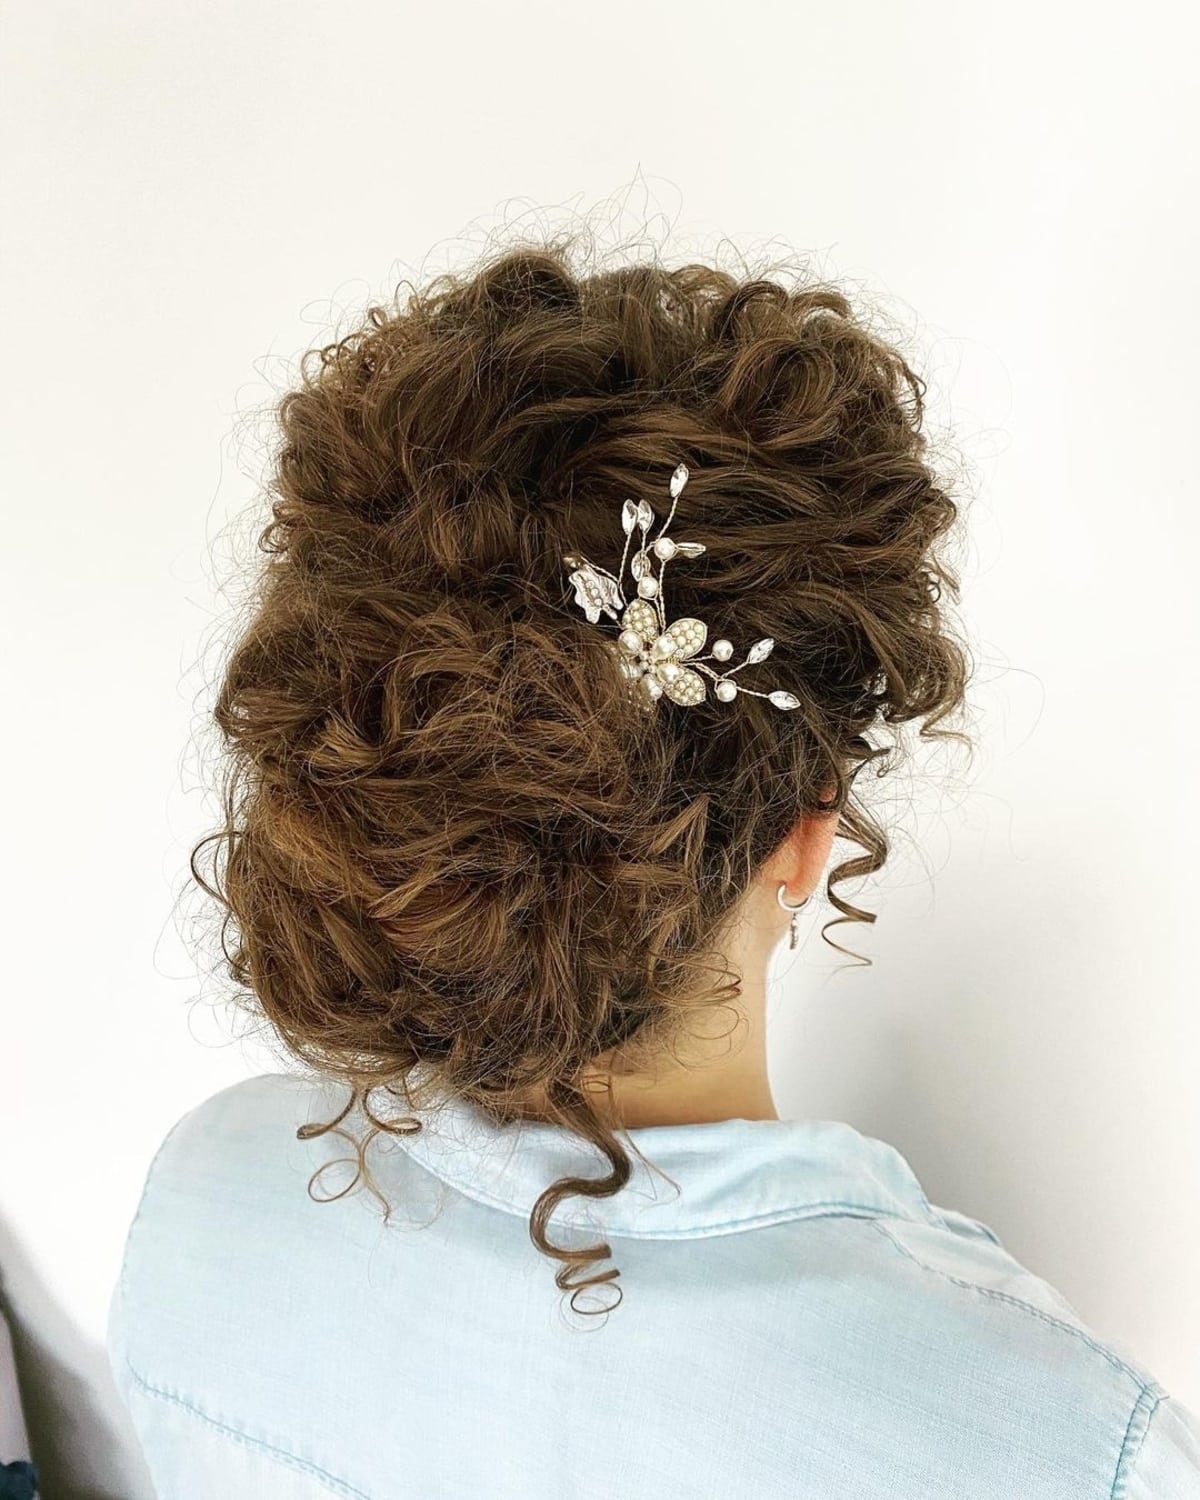 Curly updo with headpiece for the bridesmaid